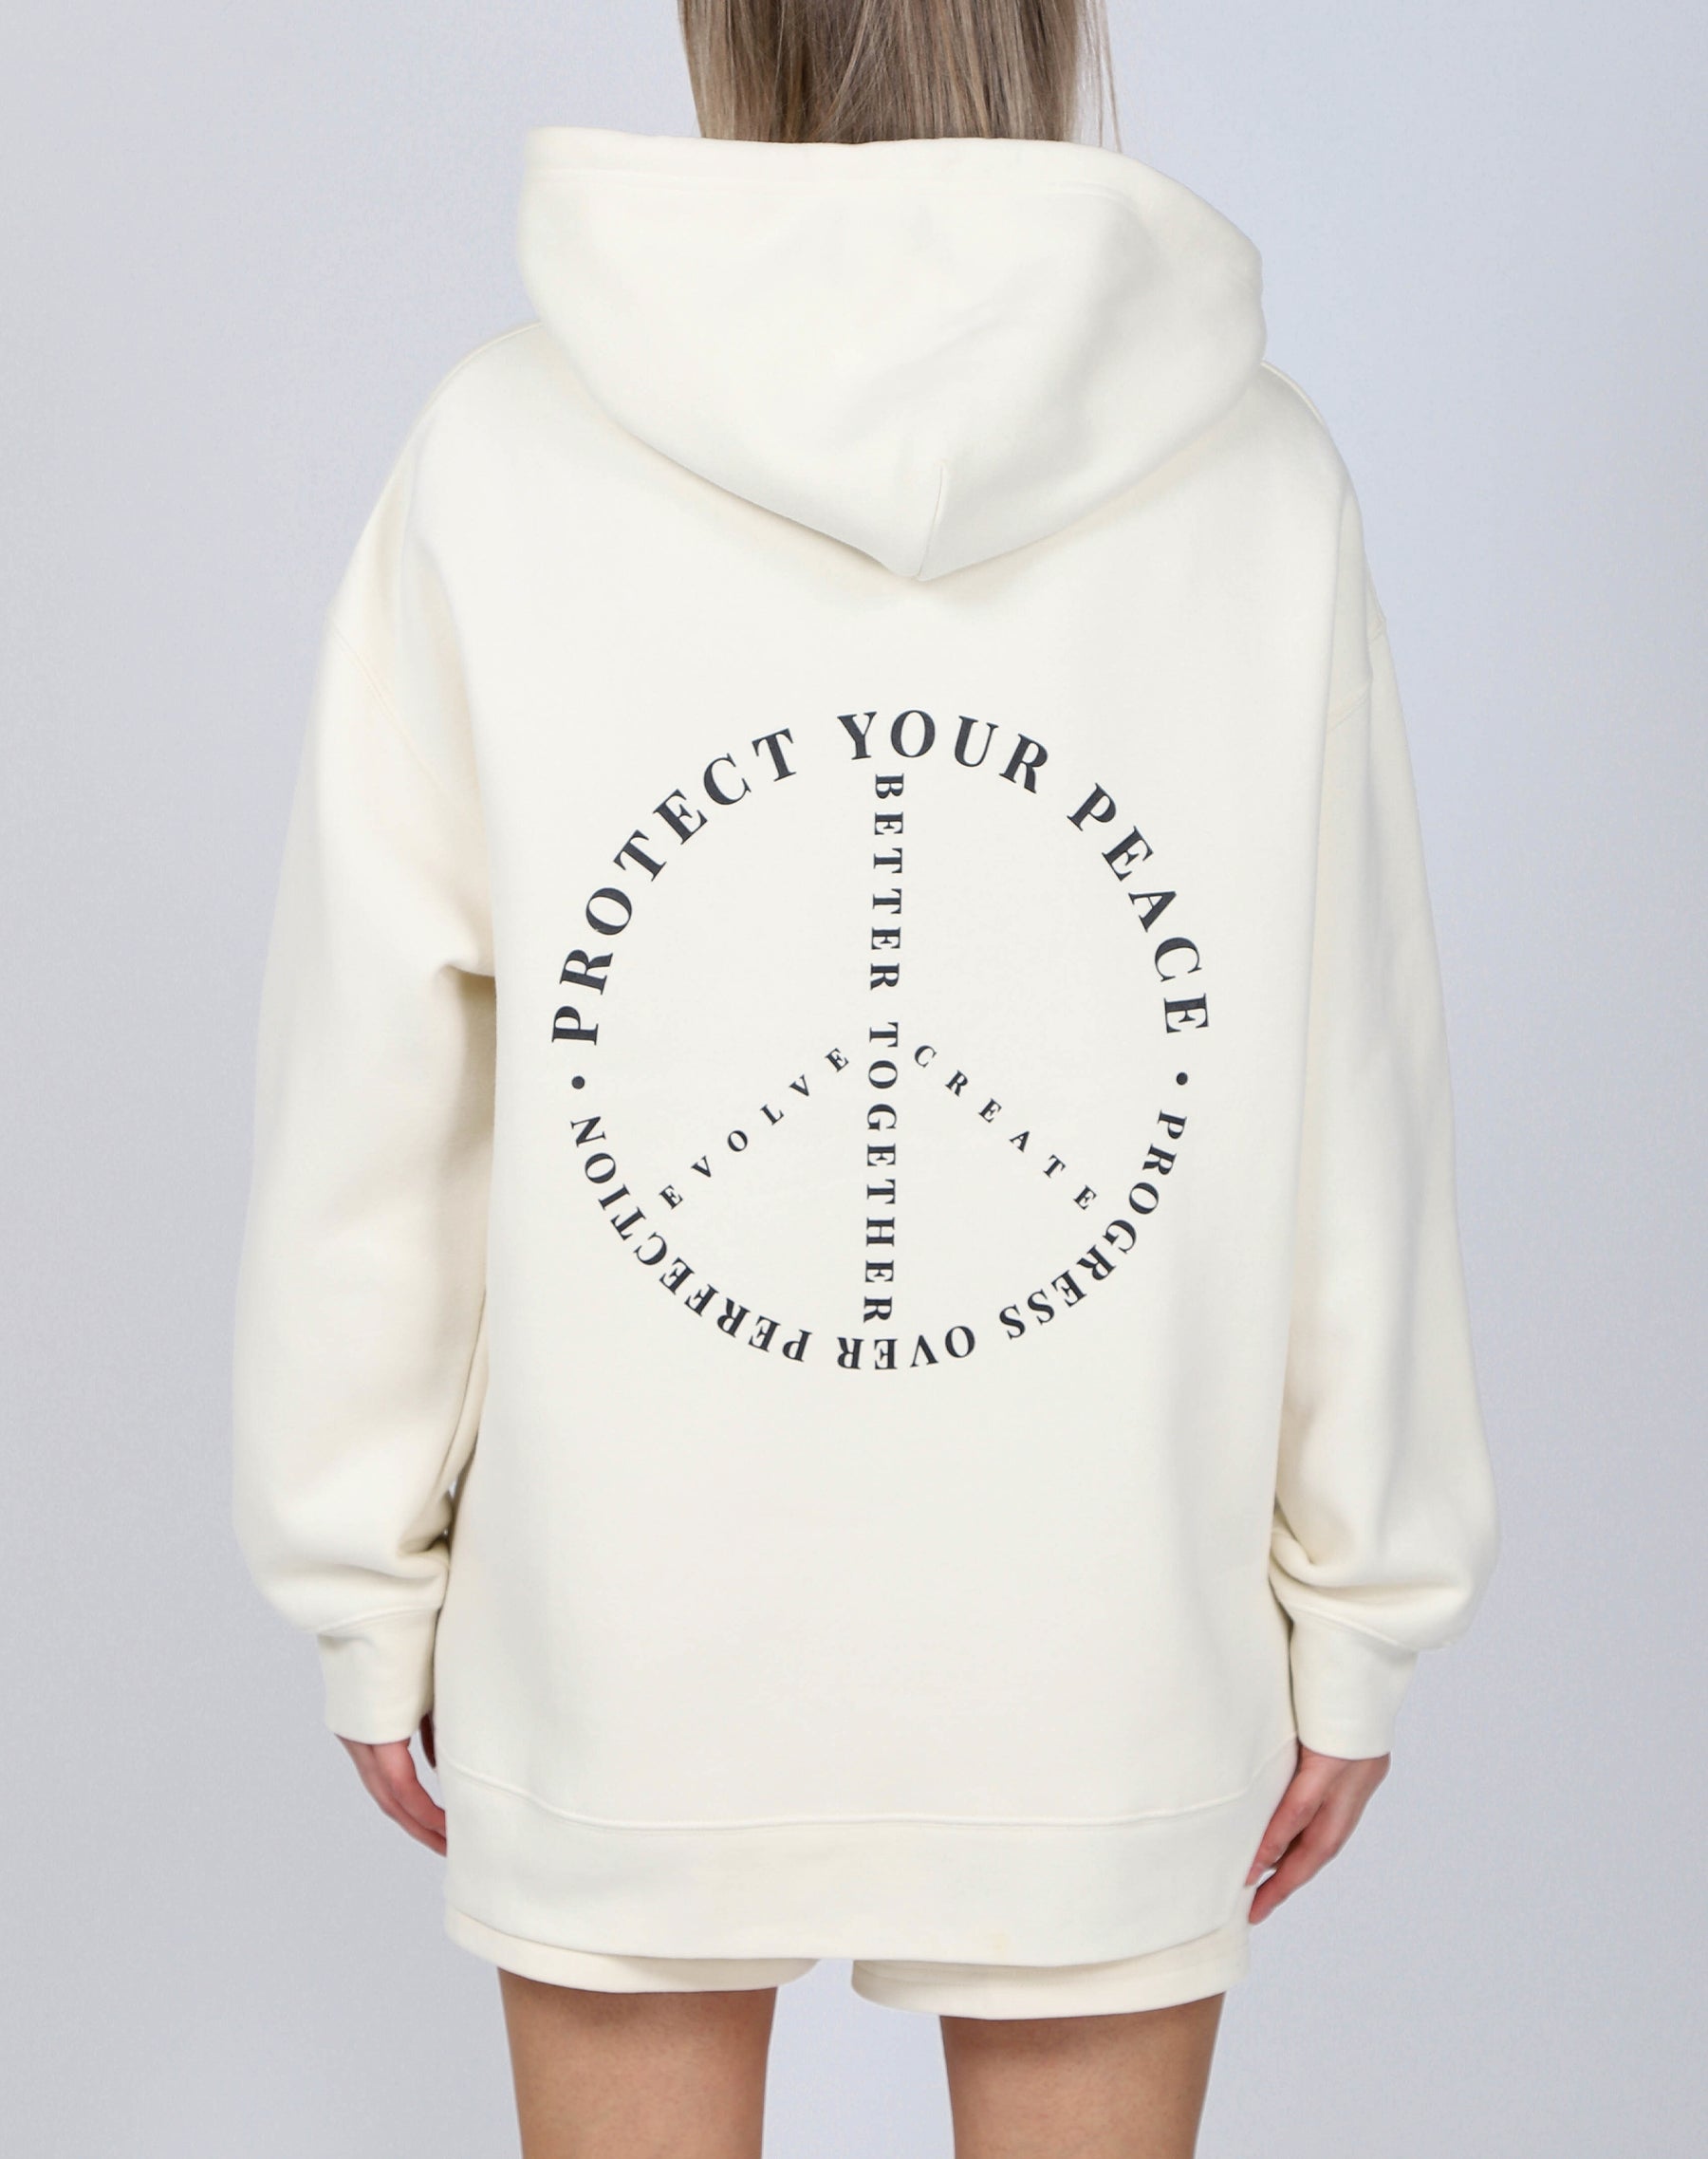 The "PROTECT YOUR PEACE" Big Sister Hoodie | Almond Milk & Black